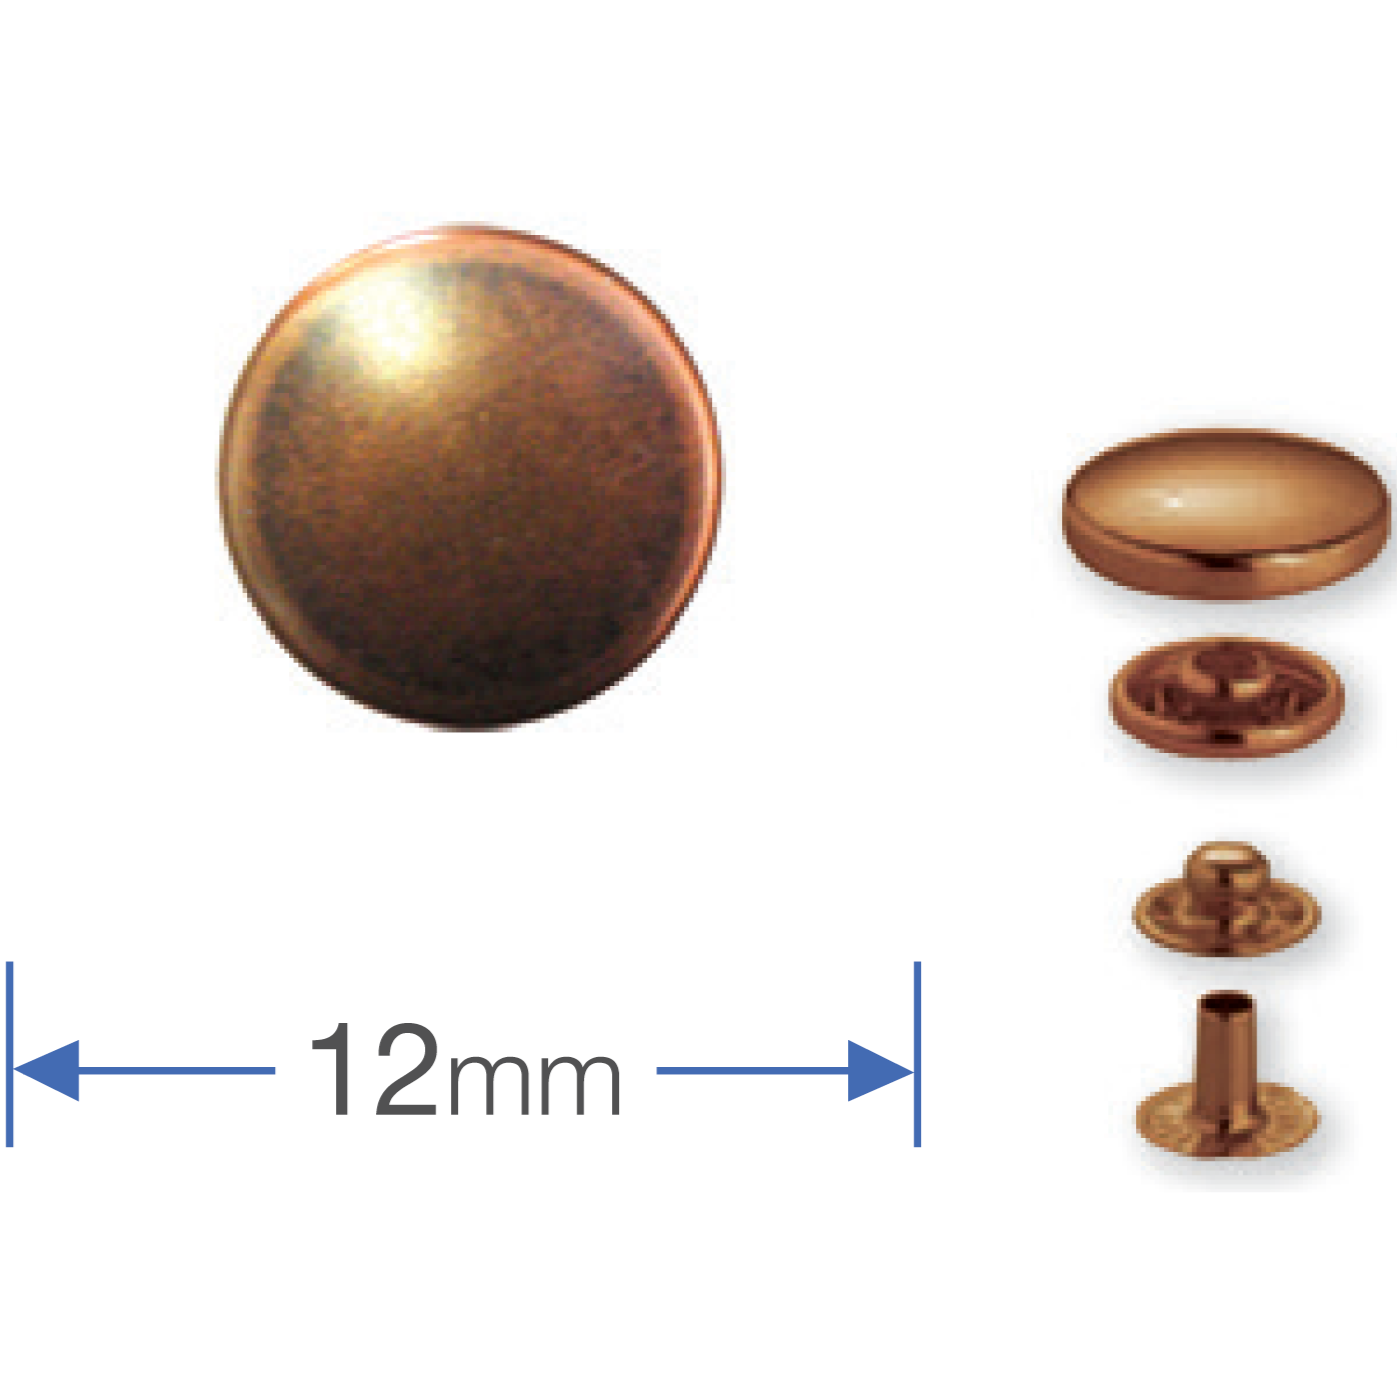 Component detail 390336 Press Studs Antique Copper 12mm from Jaycotts Sewing Supplies